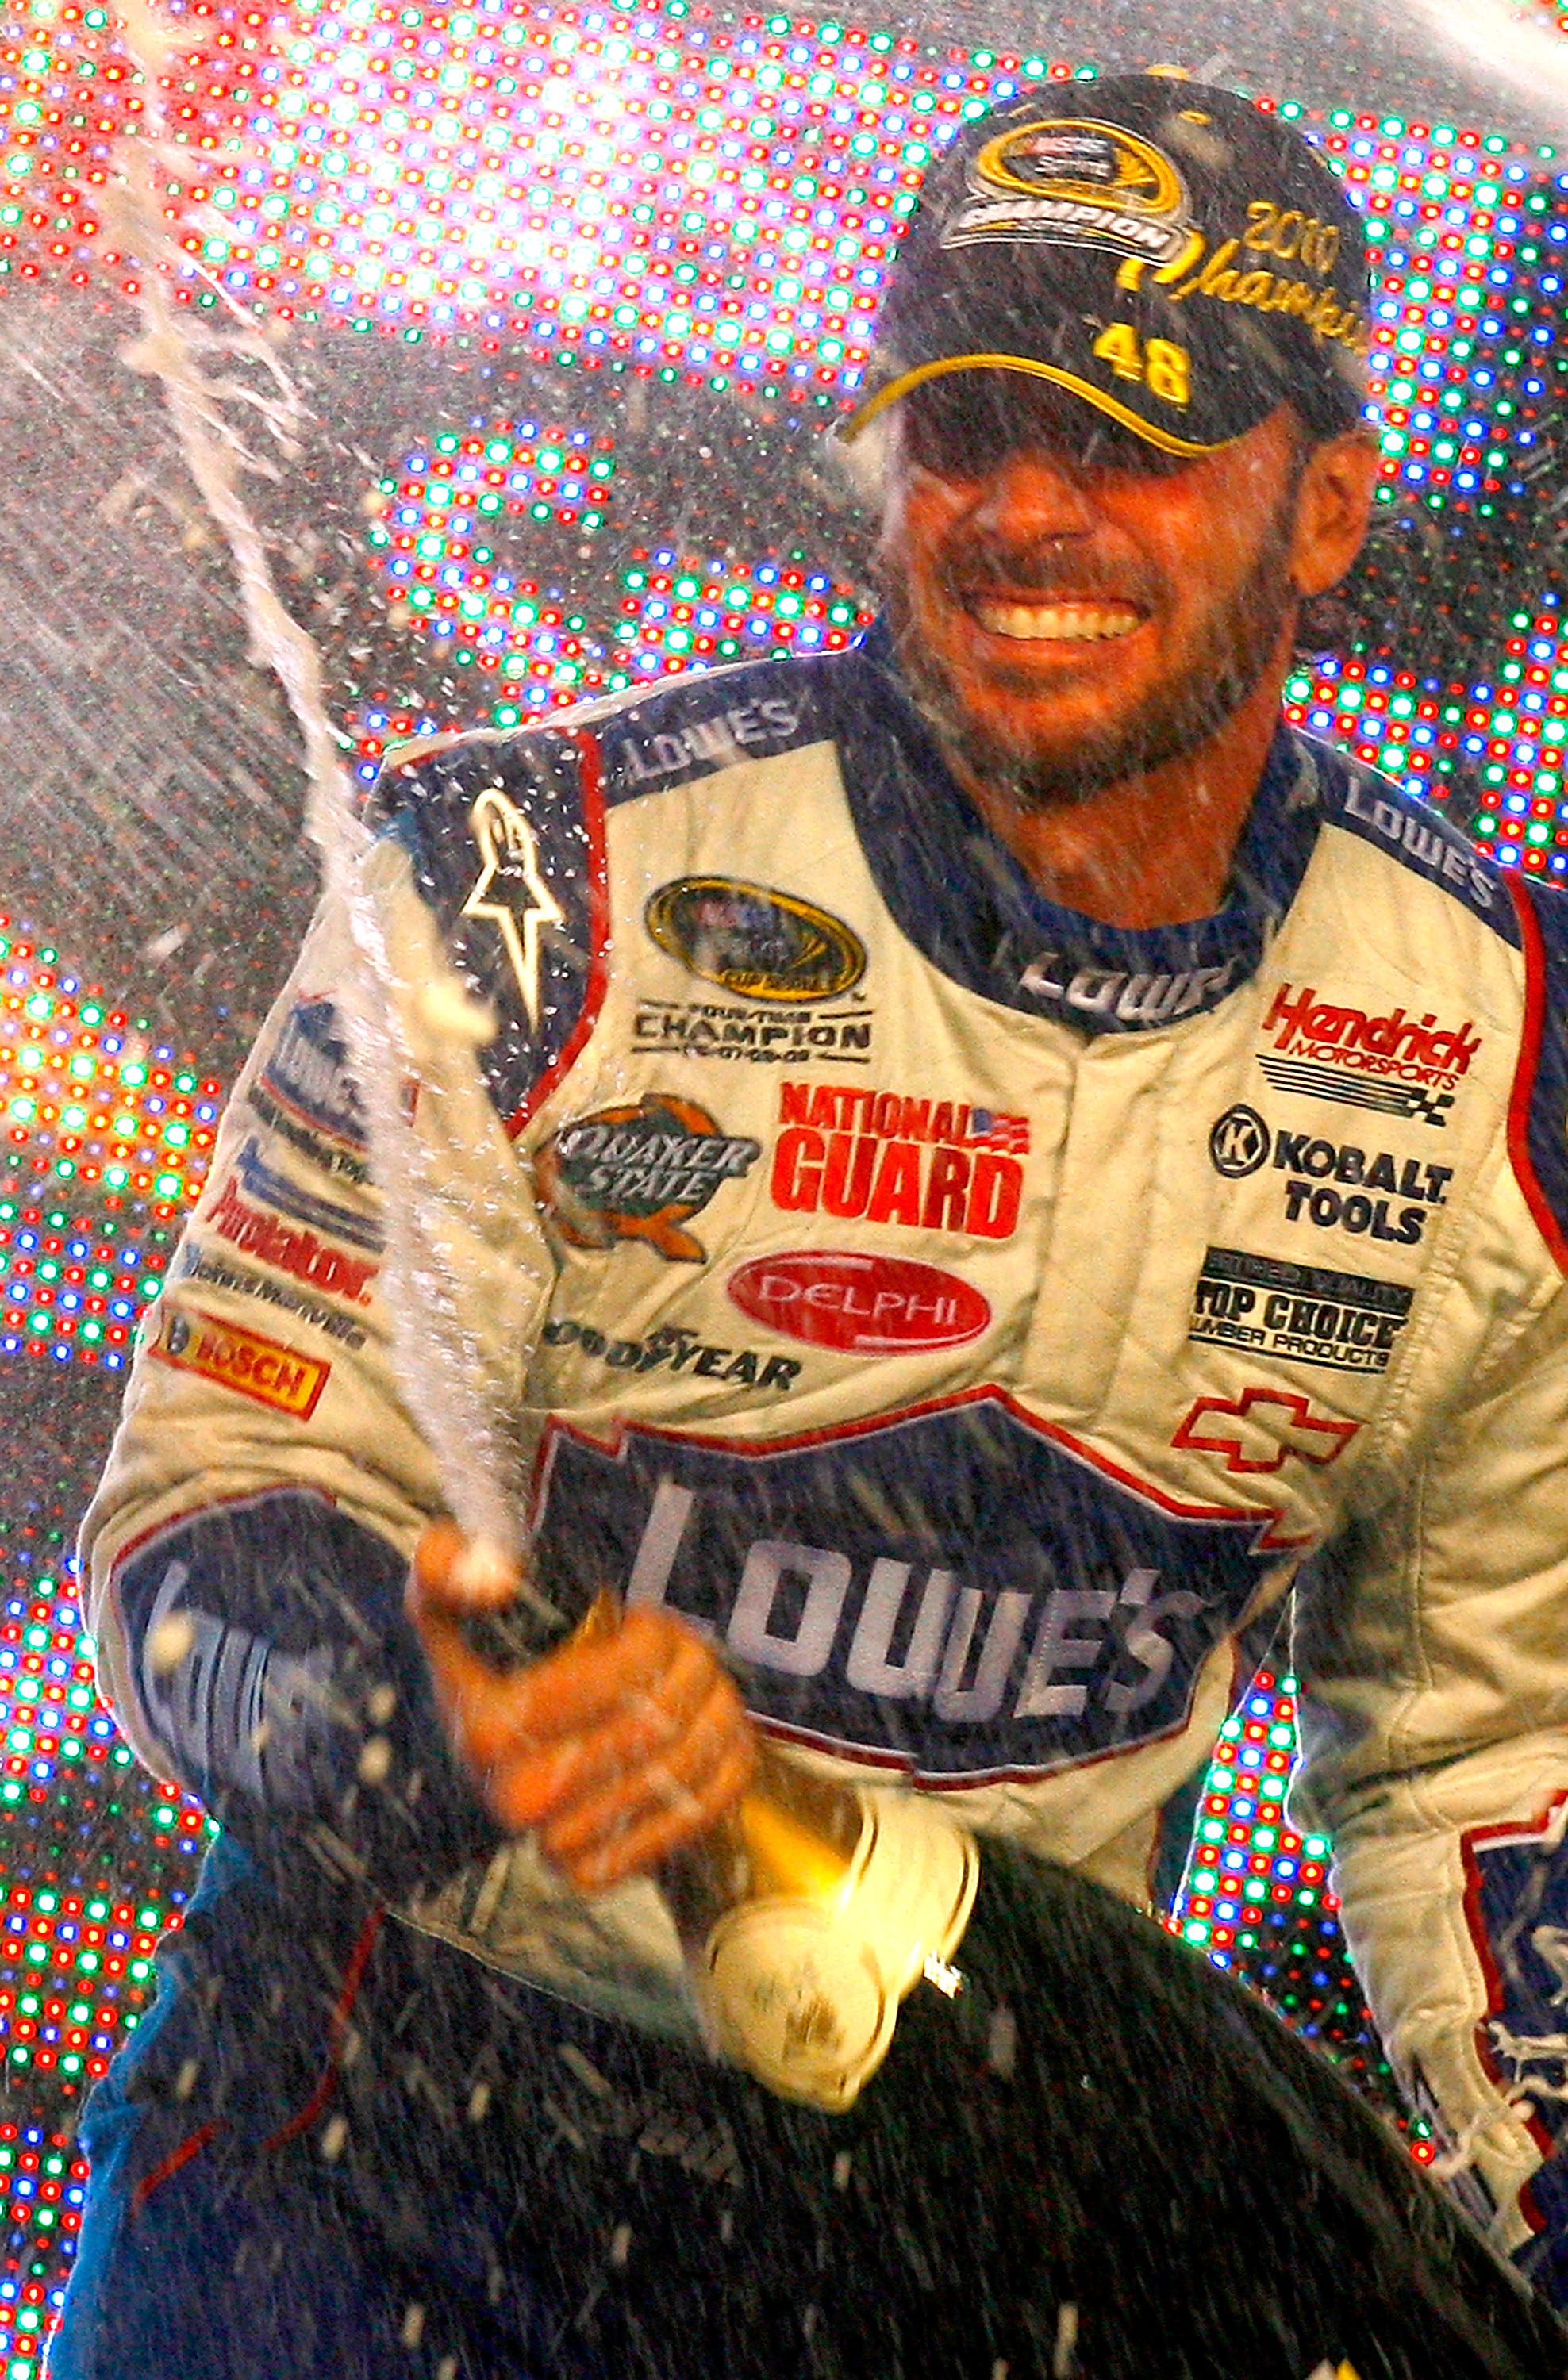 HOMESTEAD, FL - NOVEMBER 21:  Jimmie Johnson, driver of the #48 Lowe's Chevrolet, sprays champagne after winning his fifth consecutive NASCAR Sprint Cup championship following the Ford 400 at Homestead-Miami Speedway on November 21, 2010 in Homestead, Flo